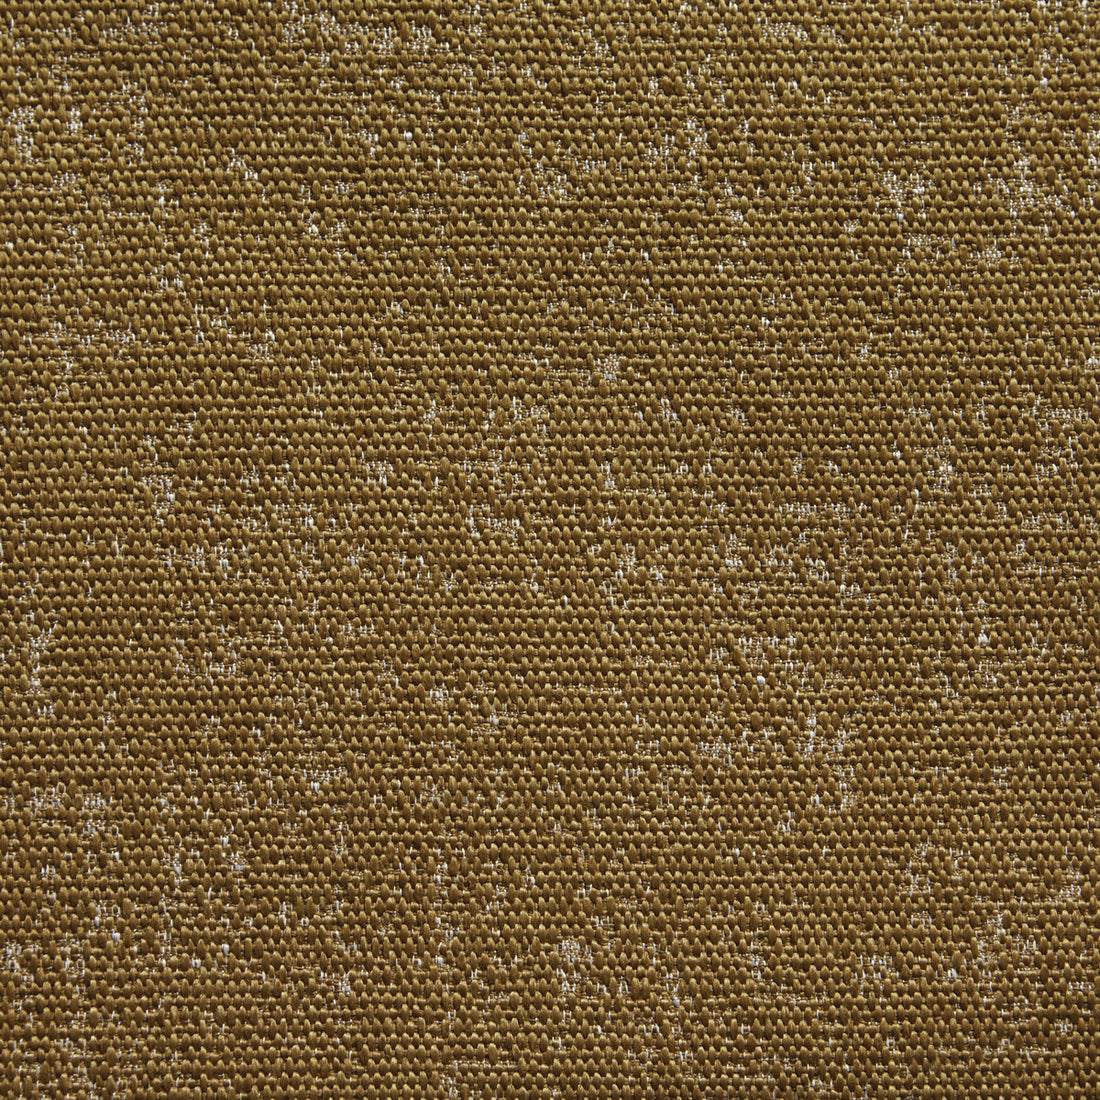 Suquet fabric in 5 color - pattern LZ-30401.05.0 - by Kravet Design in the Lizzo Indoor/Outdoor collection